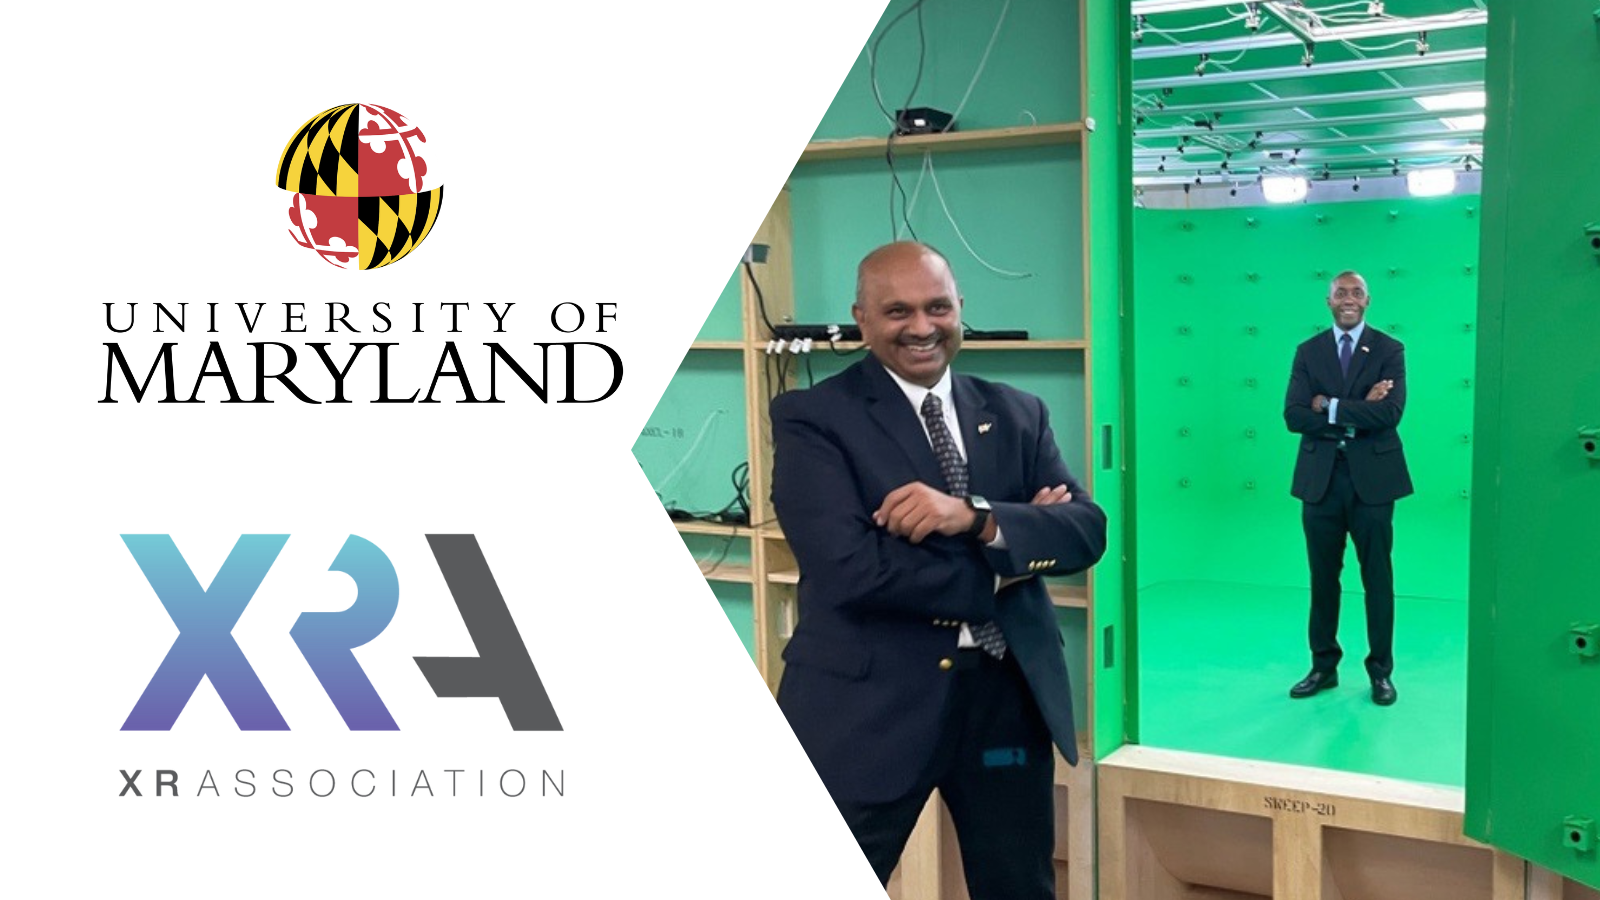 THE XR ASSOCIATION AND UNIVERSITY OF MARYLAND CO-HOST CONGRESSIONAL TOUR OF UMD’S HOLOCAMERA FACILITY